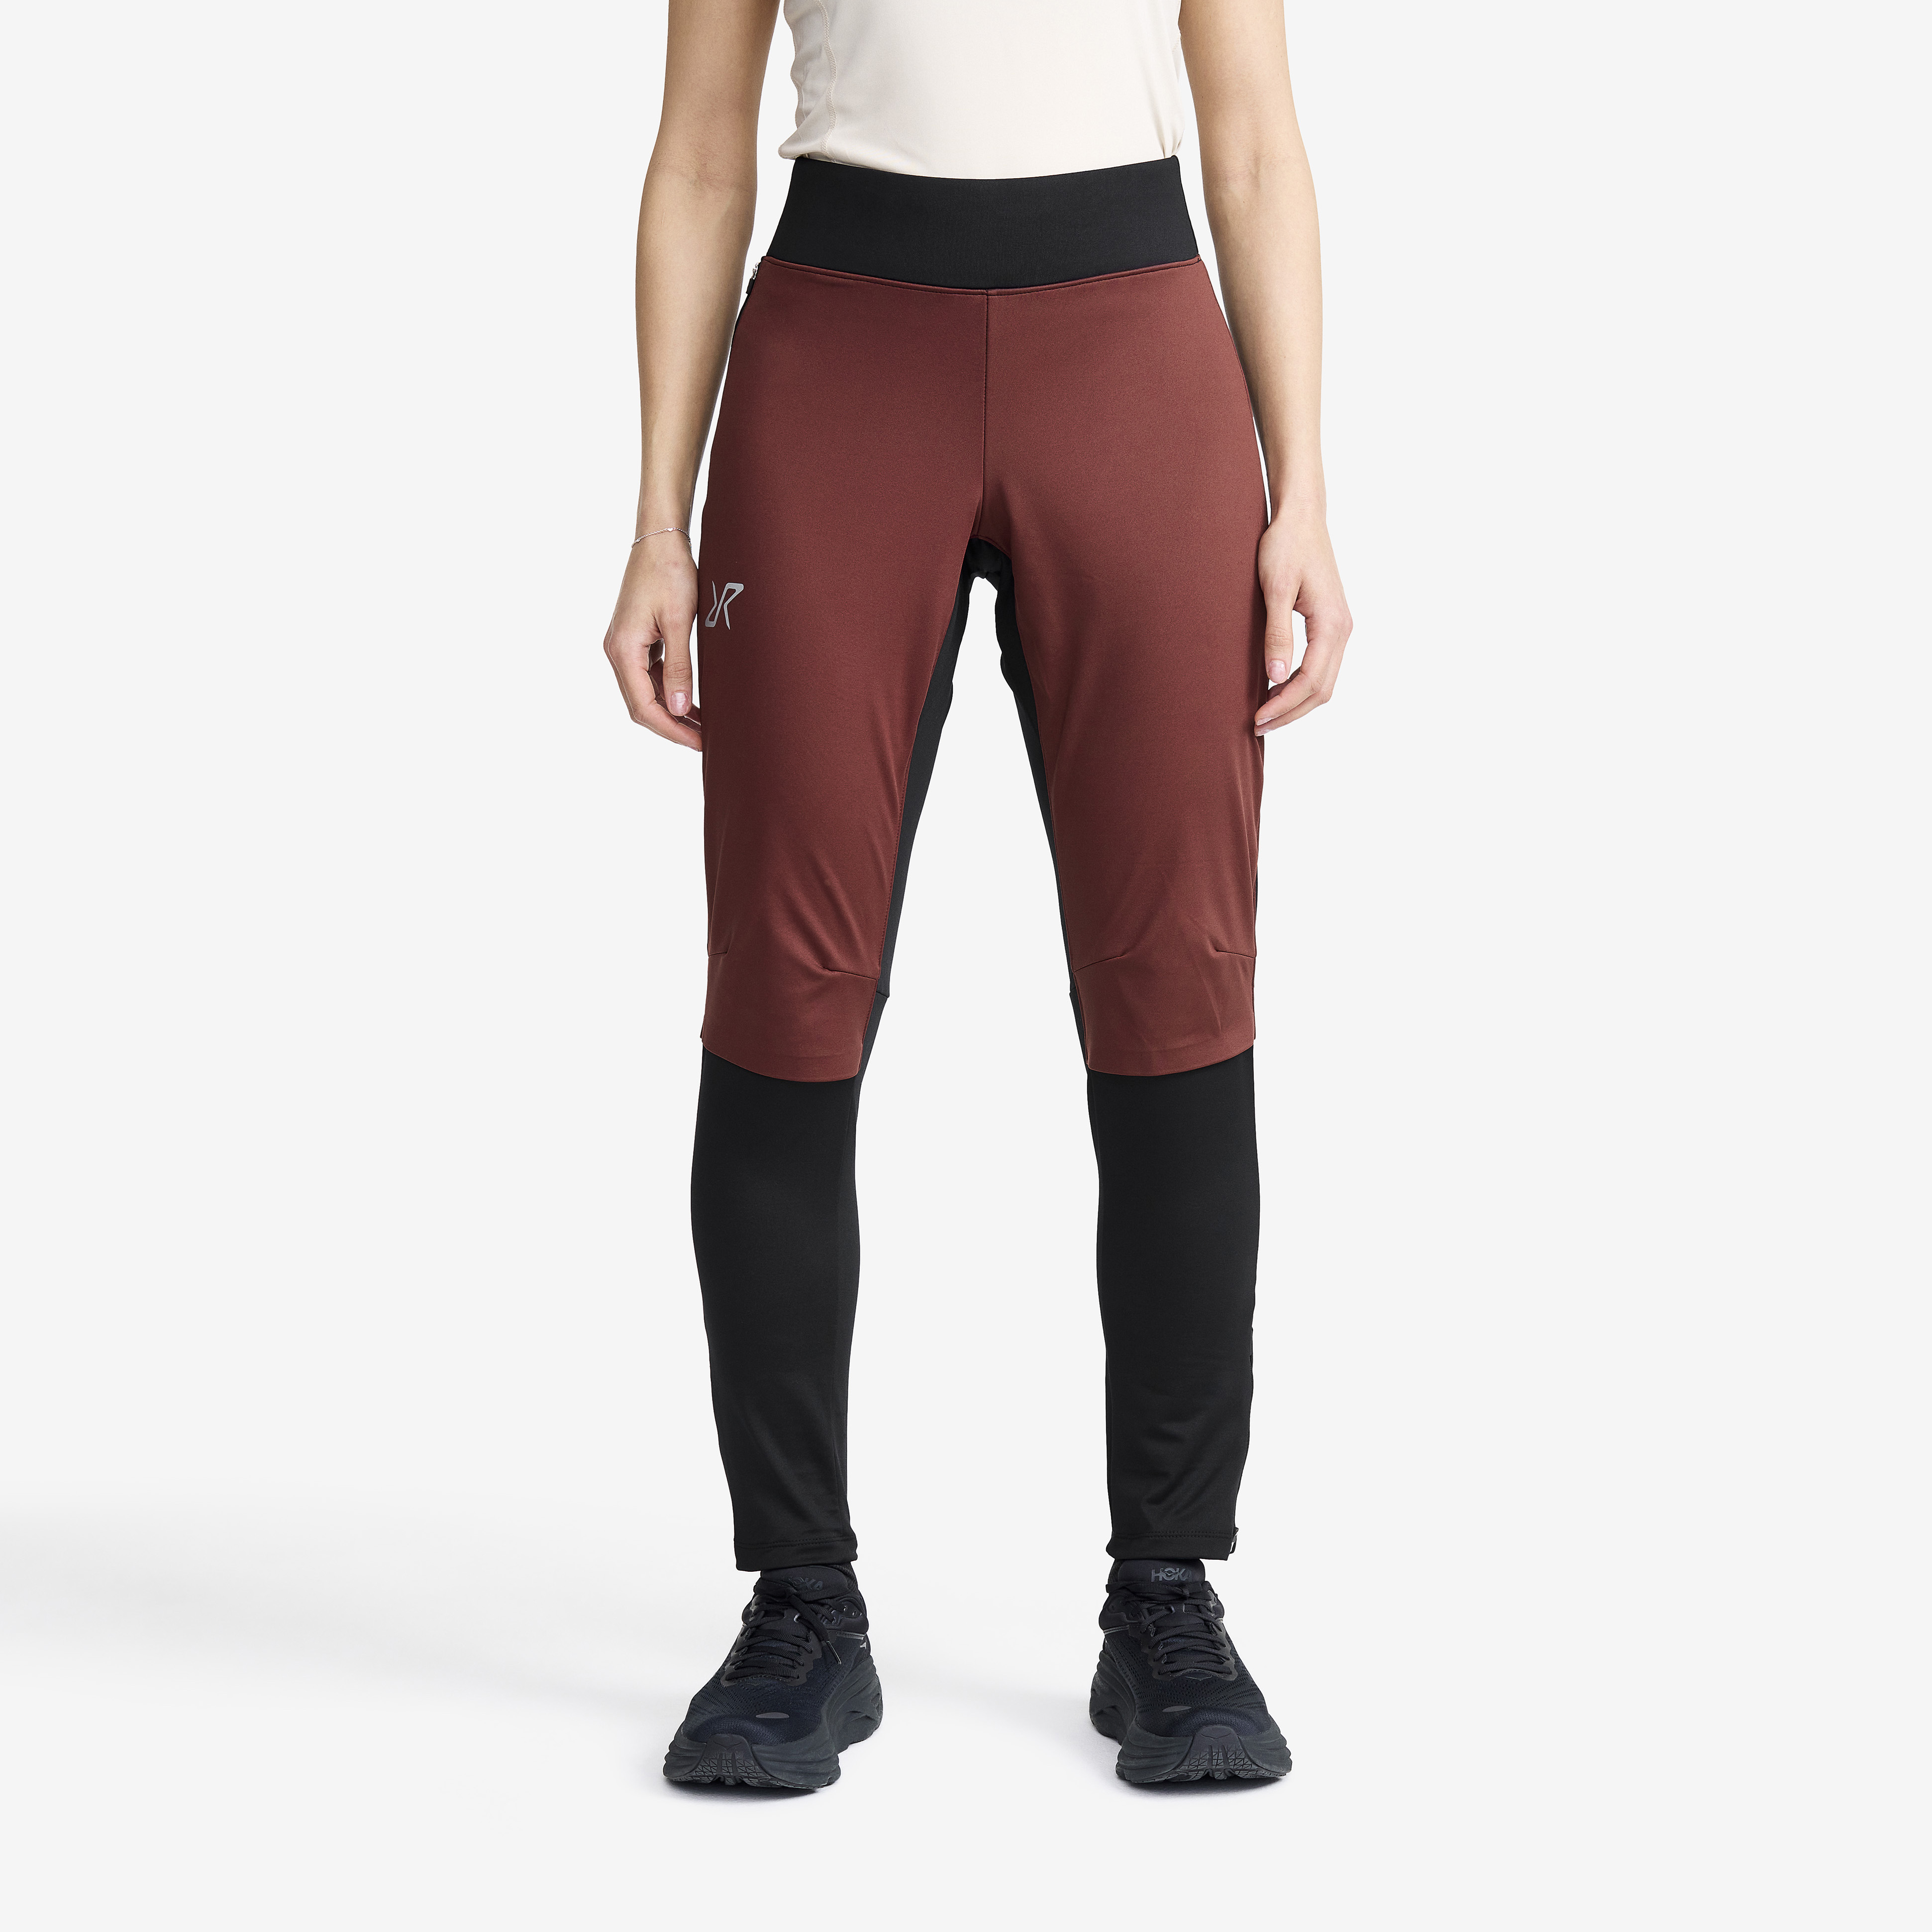 Pace Wind Tights – Dam – Andorra Storlek:S – Outdoor Tights